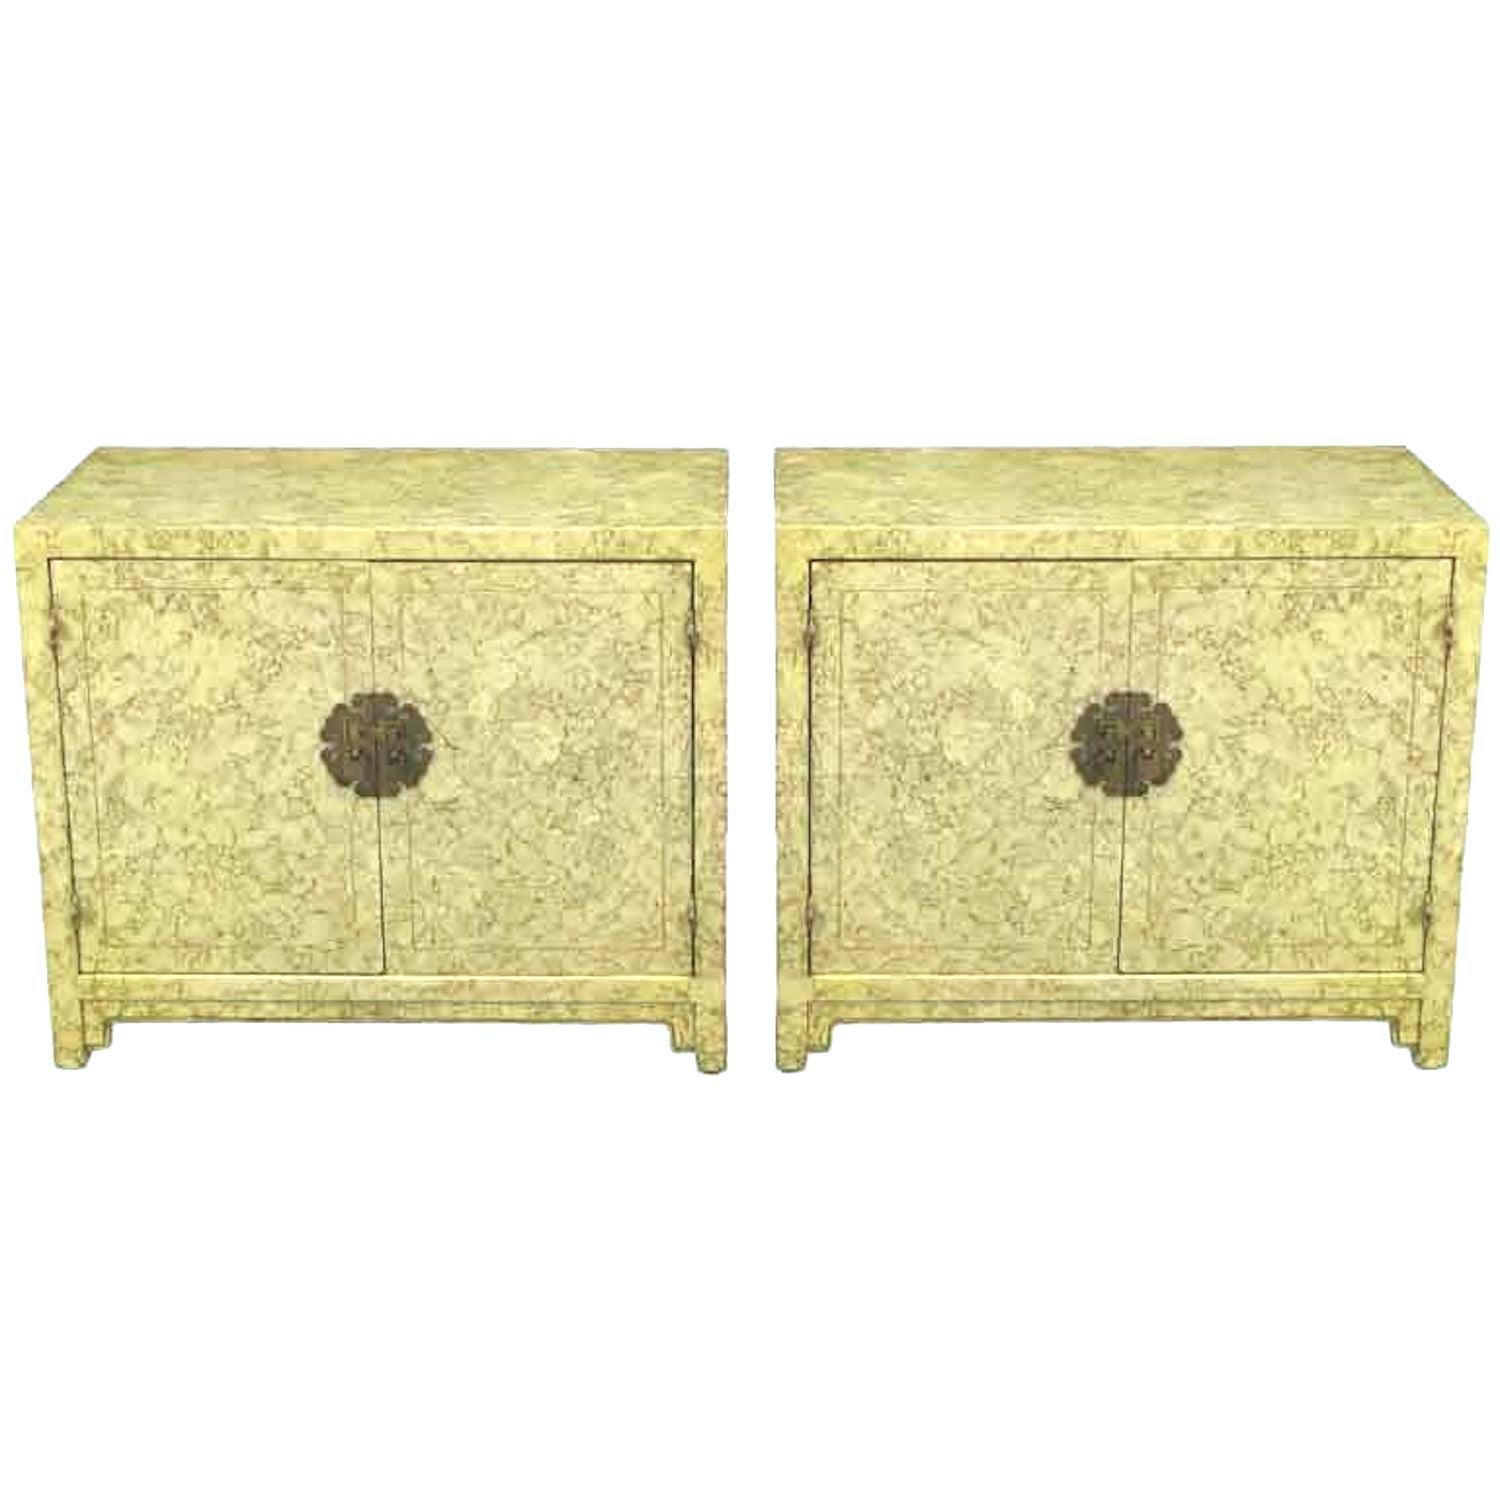 Pair of Henredon "Circa '75" Marbleized Lacquer Asian Form Cabinets